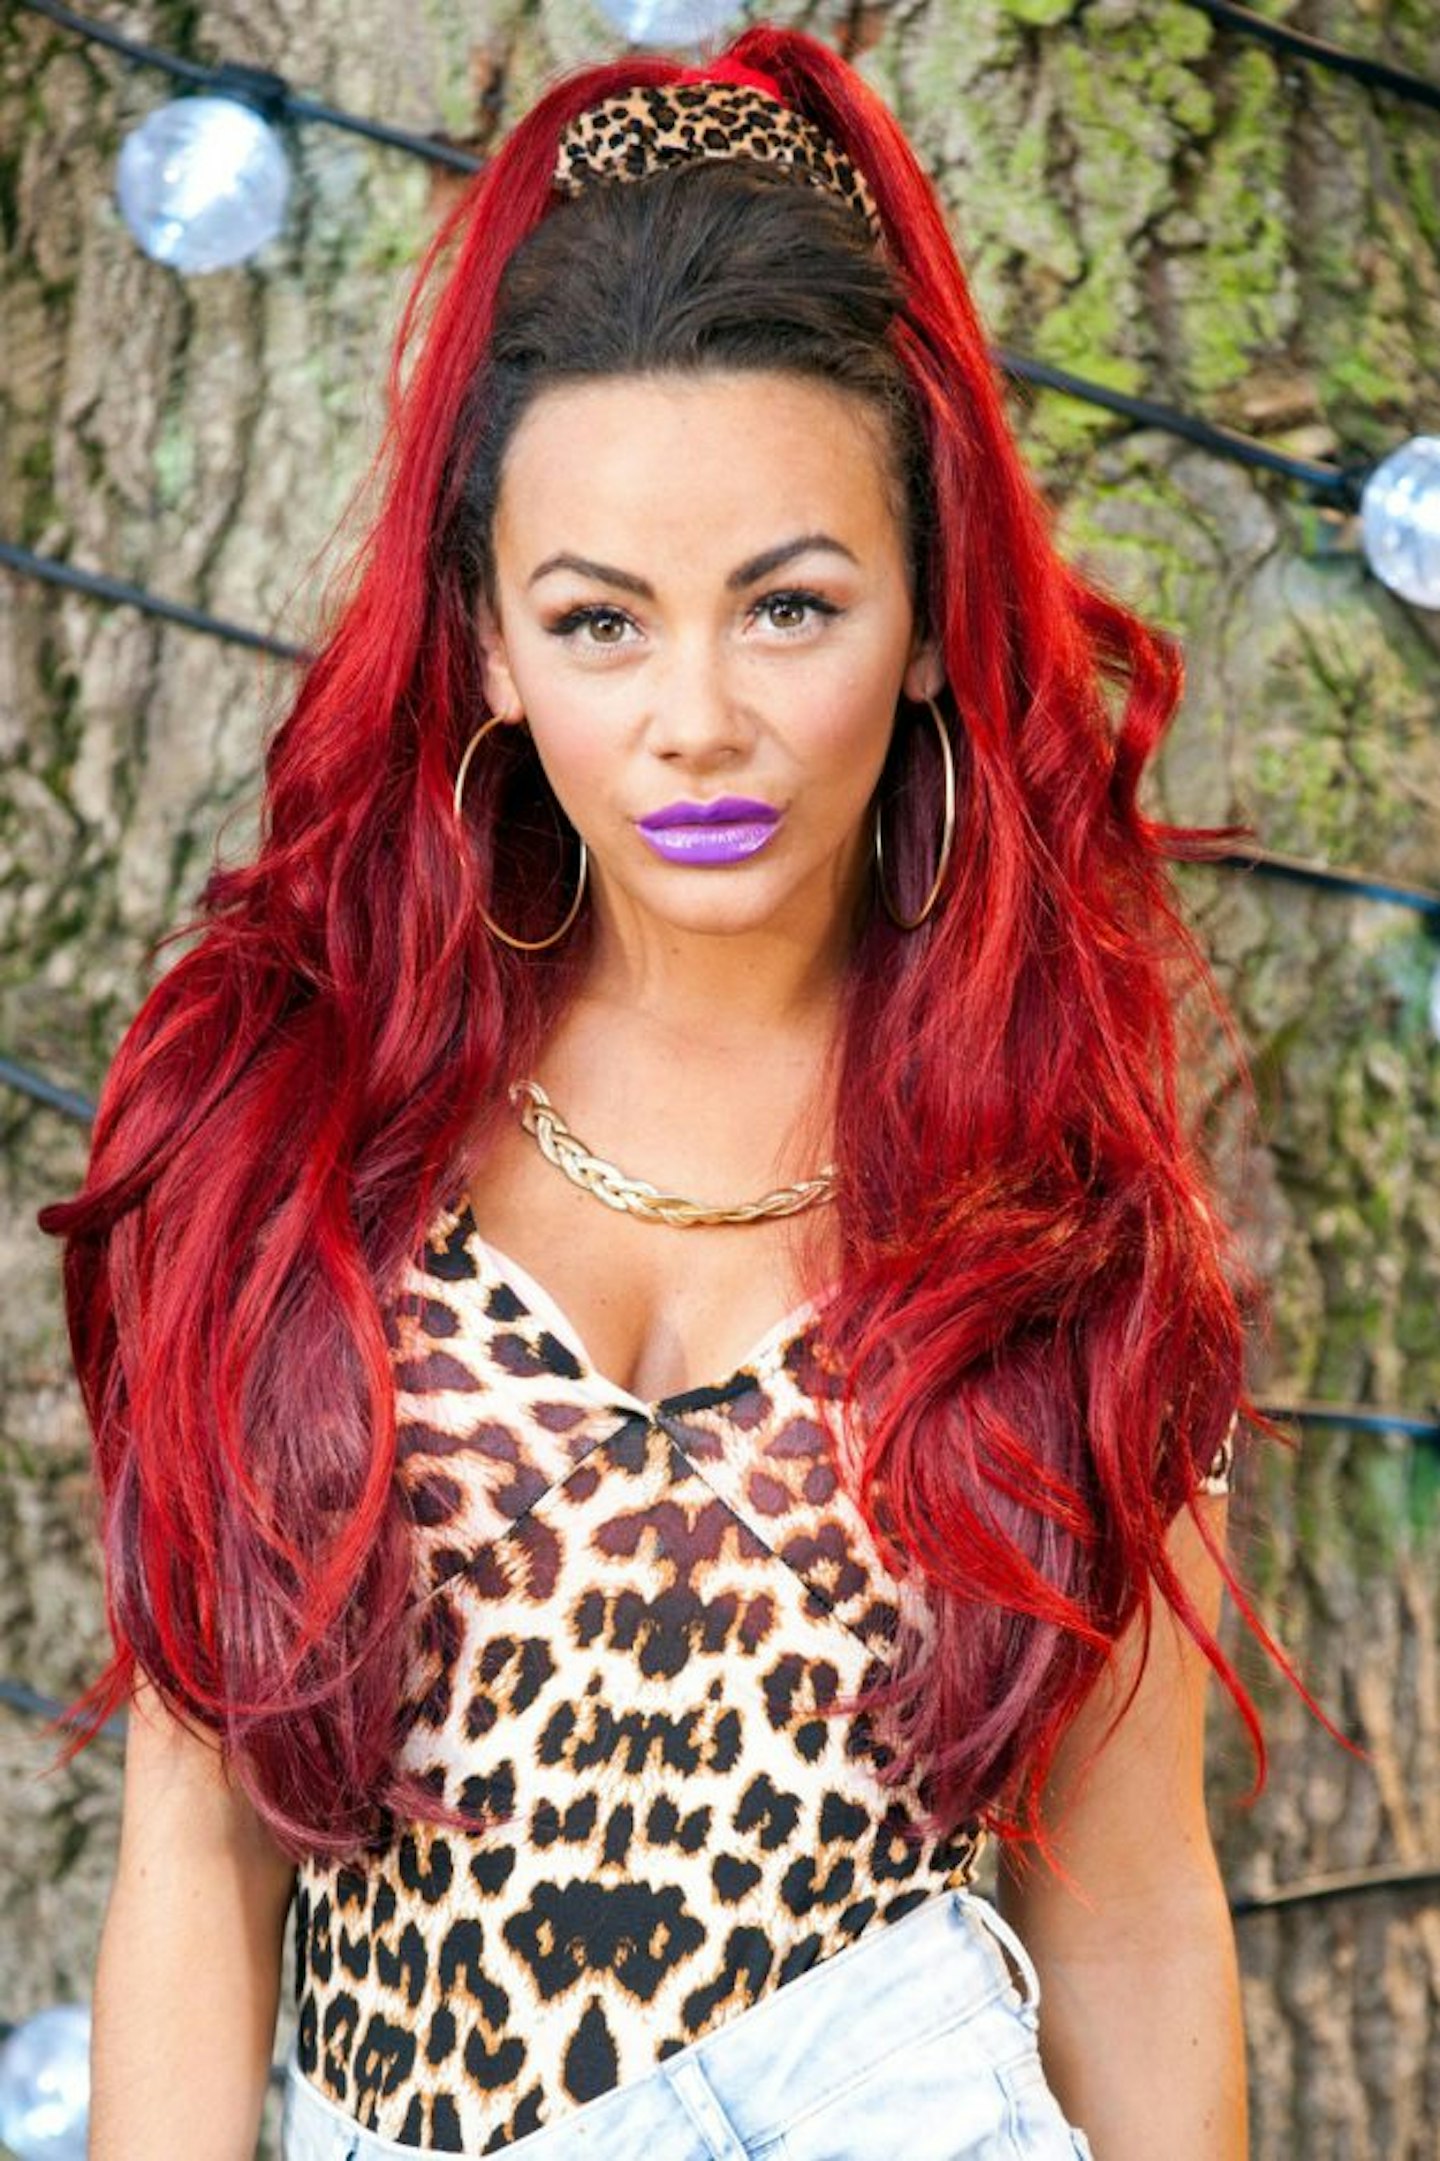 Chelsee Healey joins Hollyoaks as Goldie McQueen